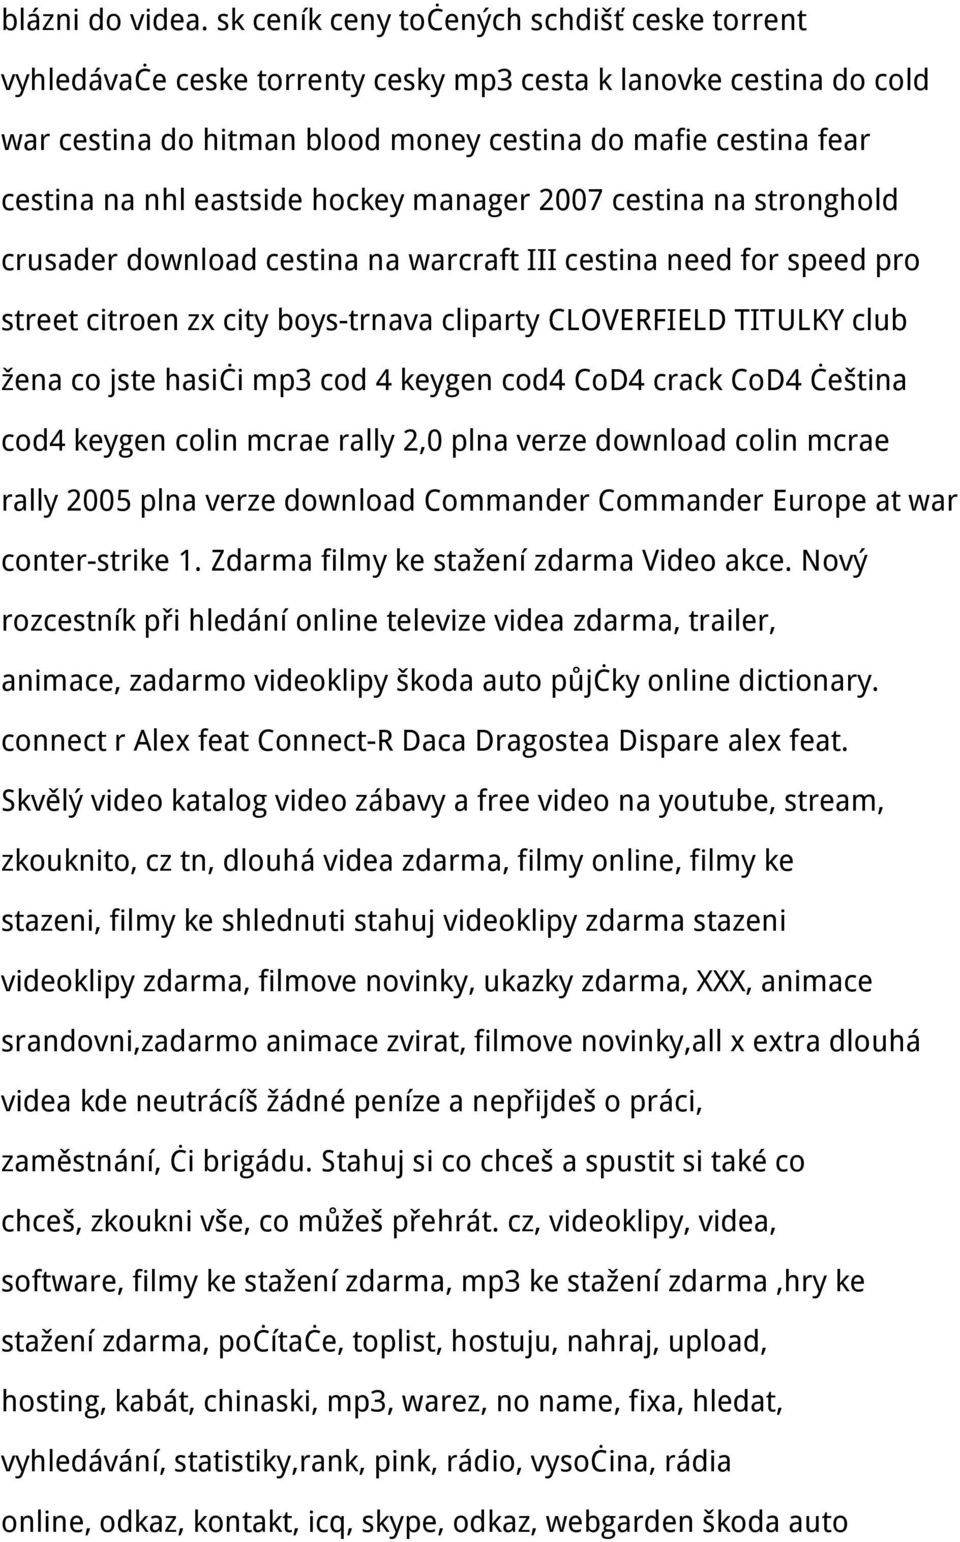 eastside hockey manager 2007 cestina na stronghold crusader download cestina na warcraft III cestina need for speed pro street citroen zx city boys-trnava cliparty CLOVERFIELD TITULKY club žena co